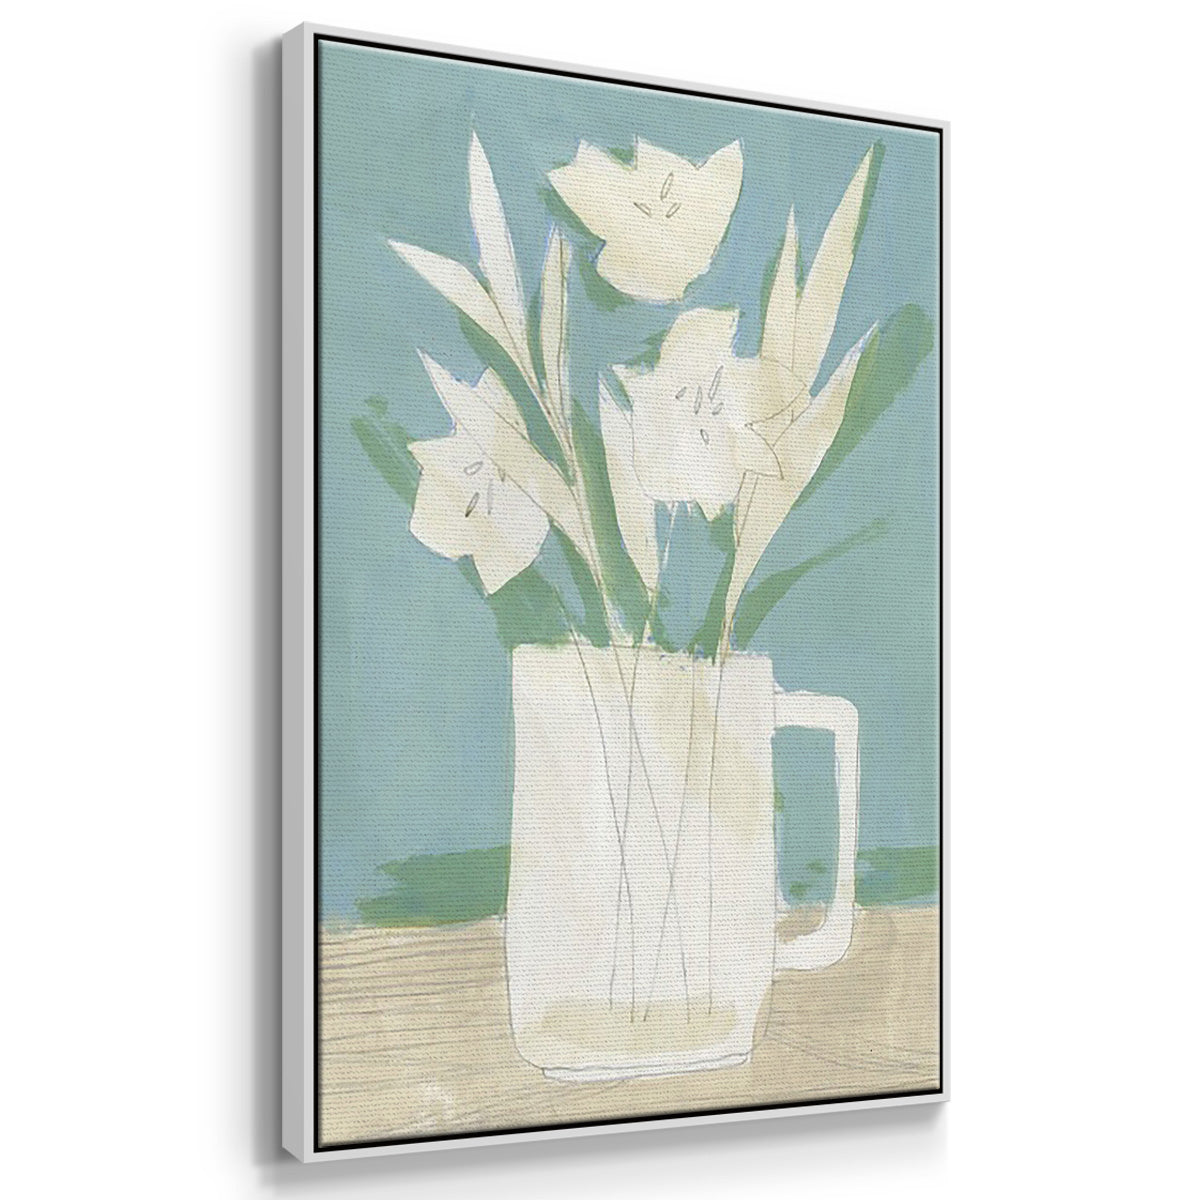 Muted Spring Arrangement I - Framed Premium Gallery Wrapped Canvas L Frame 3 Piece Set - Ready to Hang